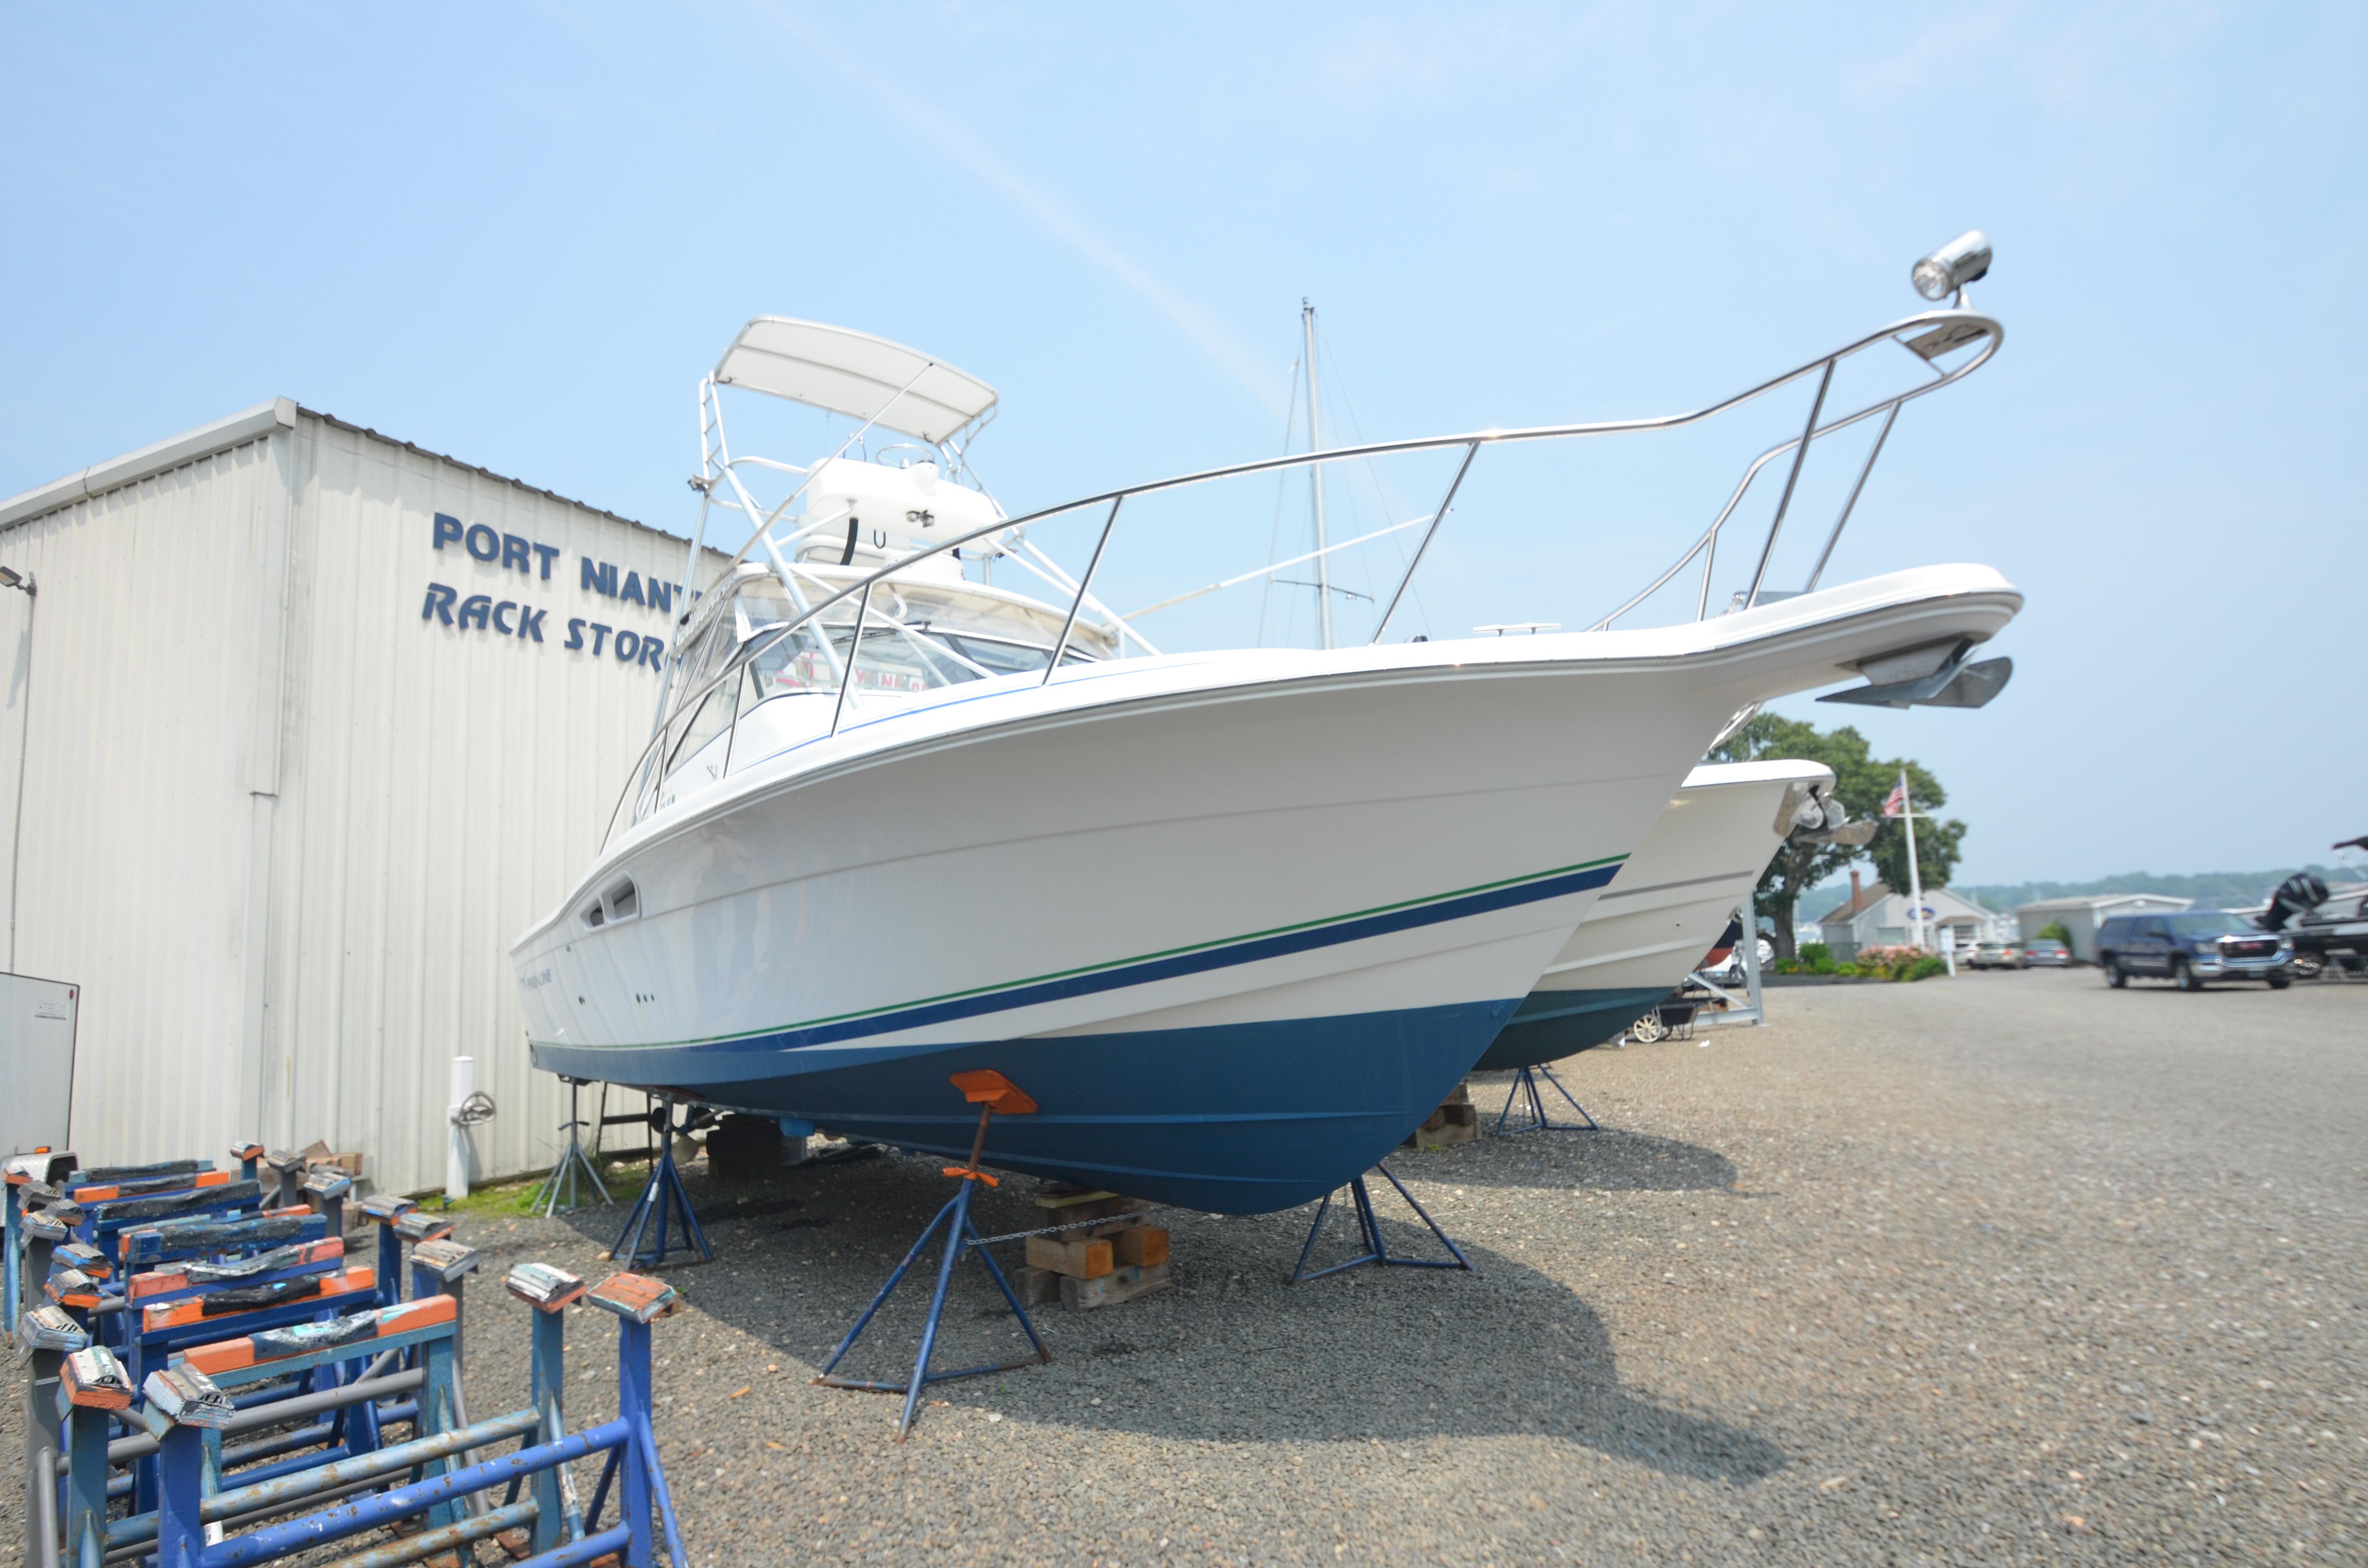 Pro-Line Boats, Manufacturer of Quality Pleasure & Fishing Boats